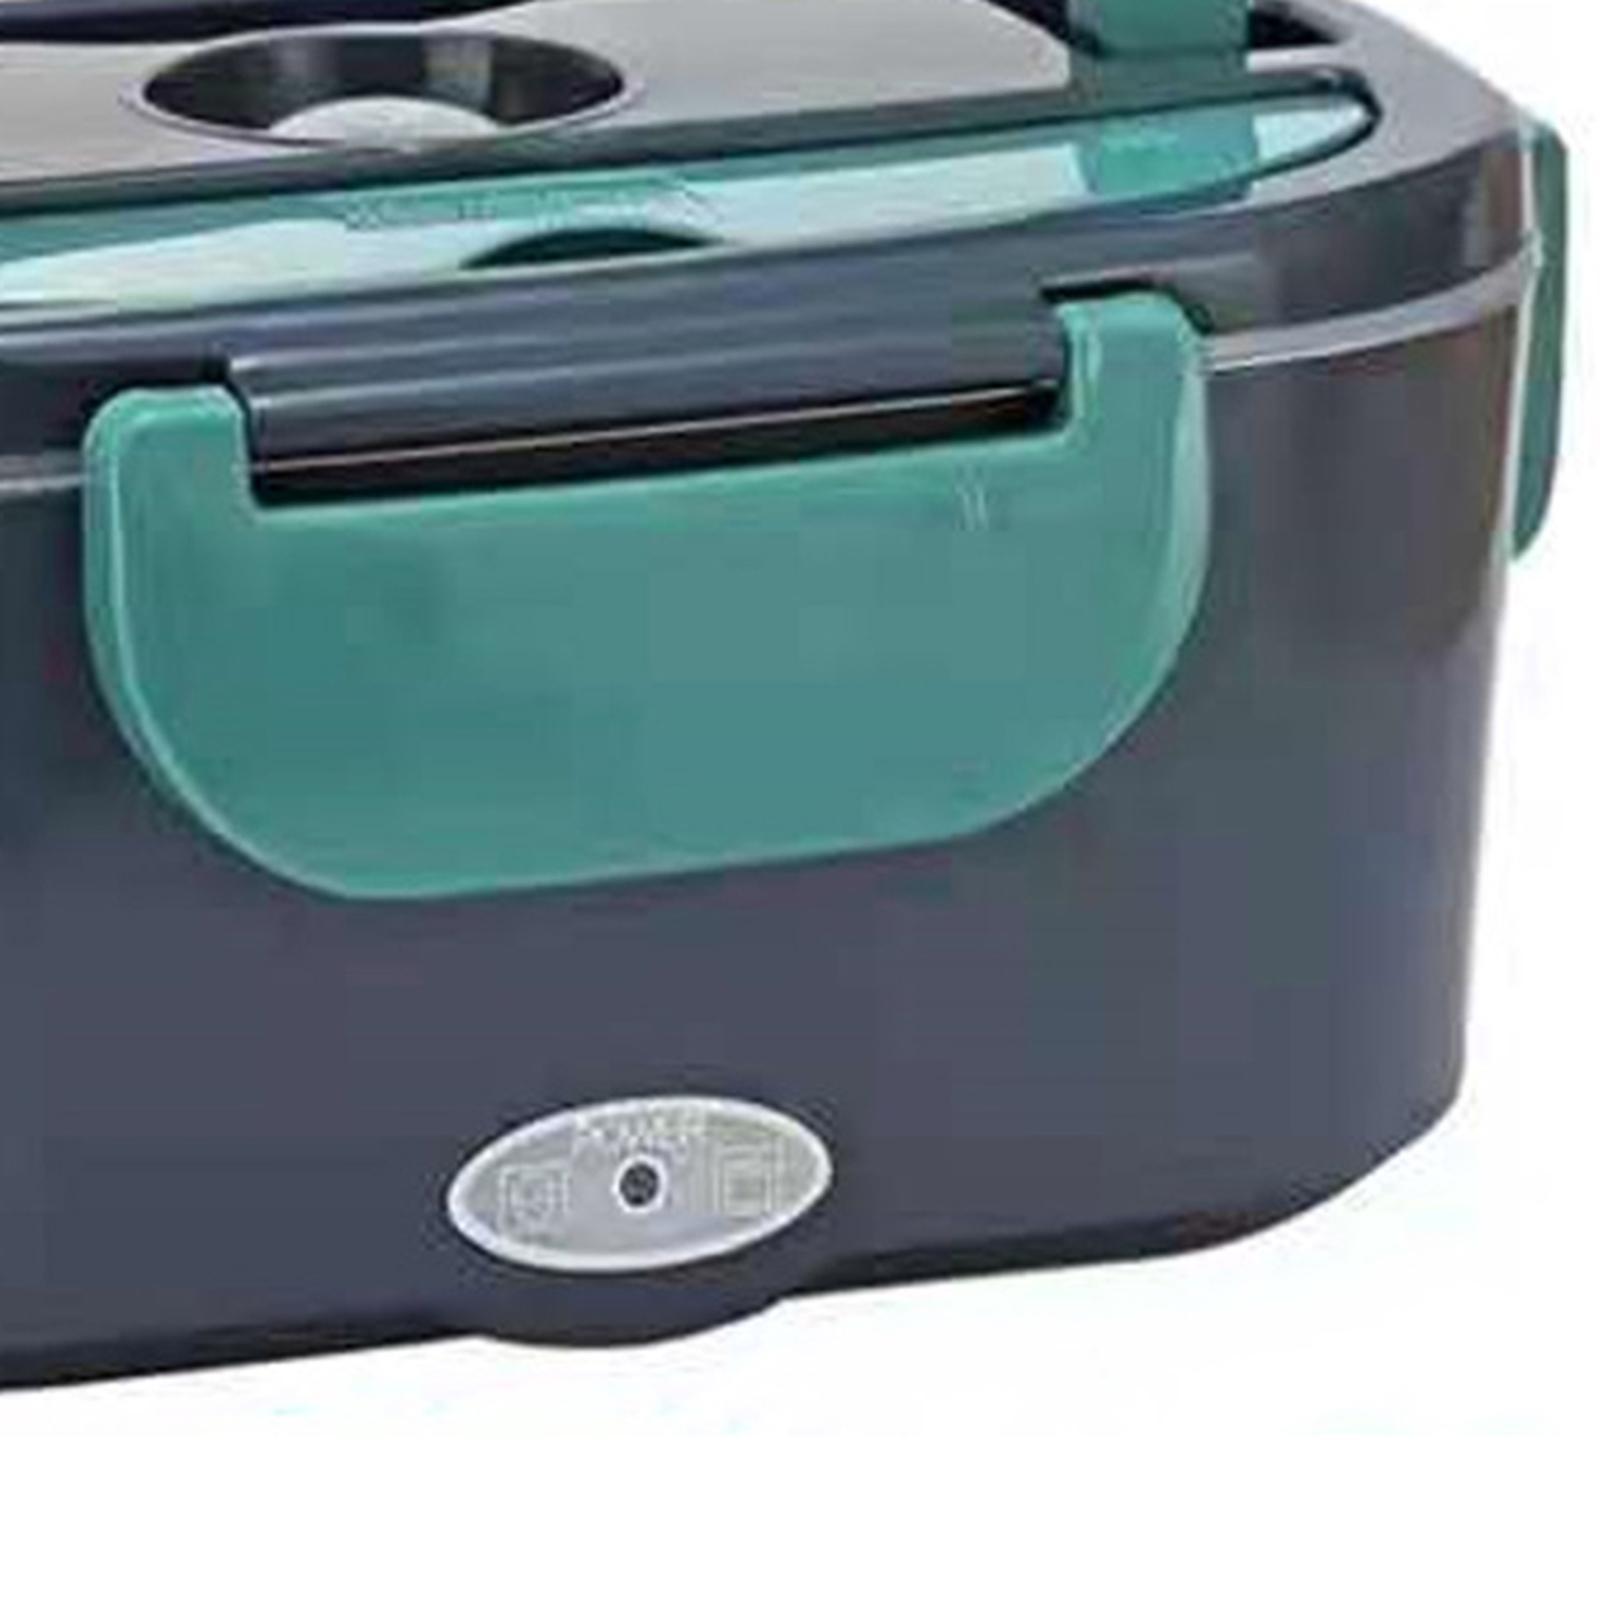 Electric Lunch Box with Spoon and Fork with Storage Bag 1.5L Detachable Bento Box Lunch Container Heating Lunchbox for Traveling Home Car